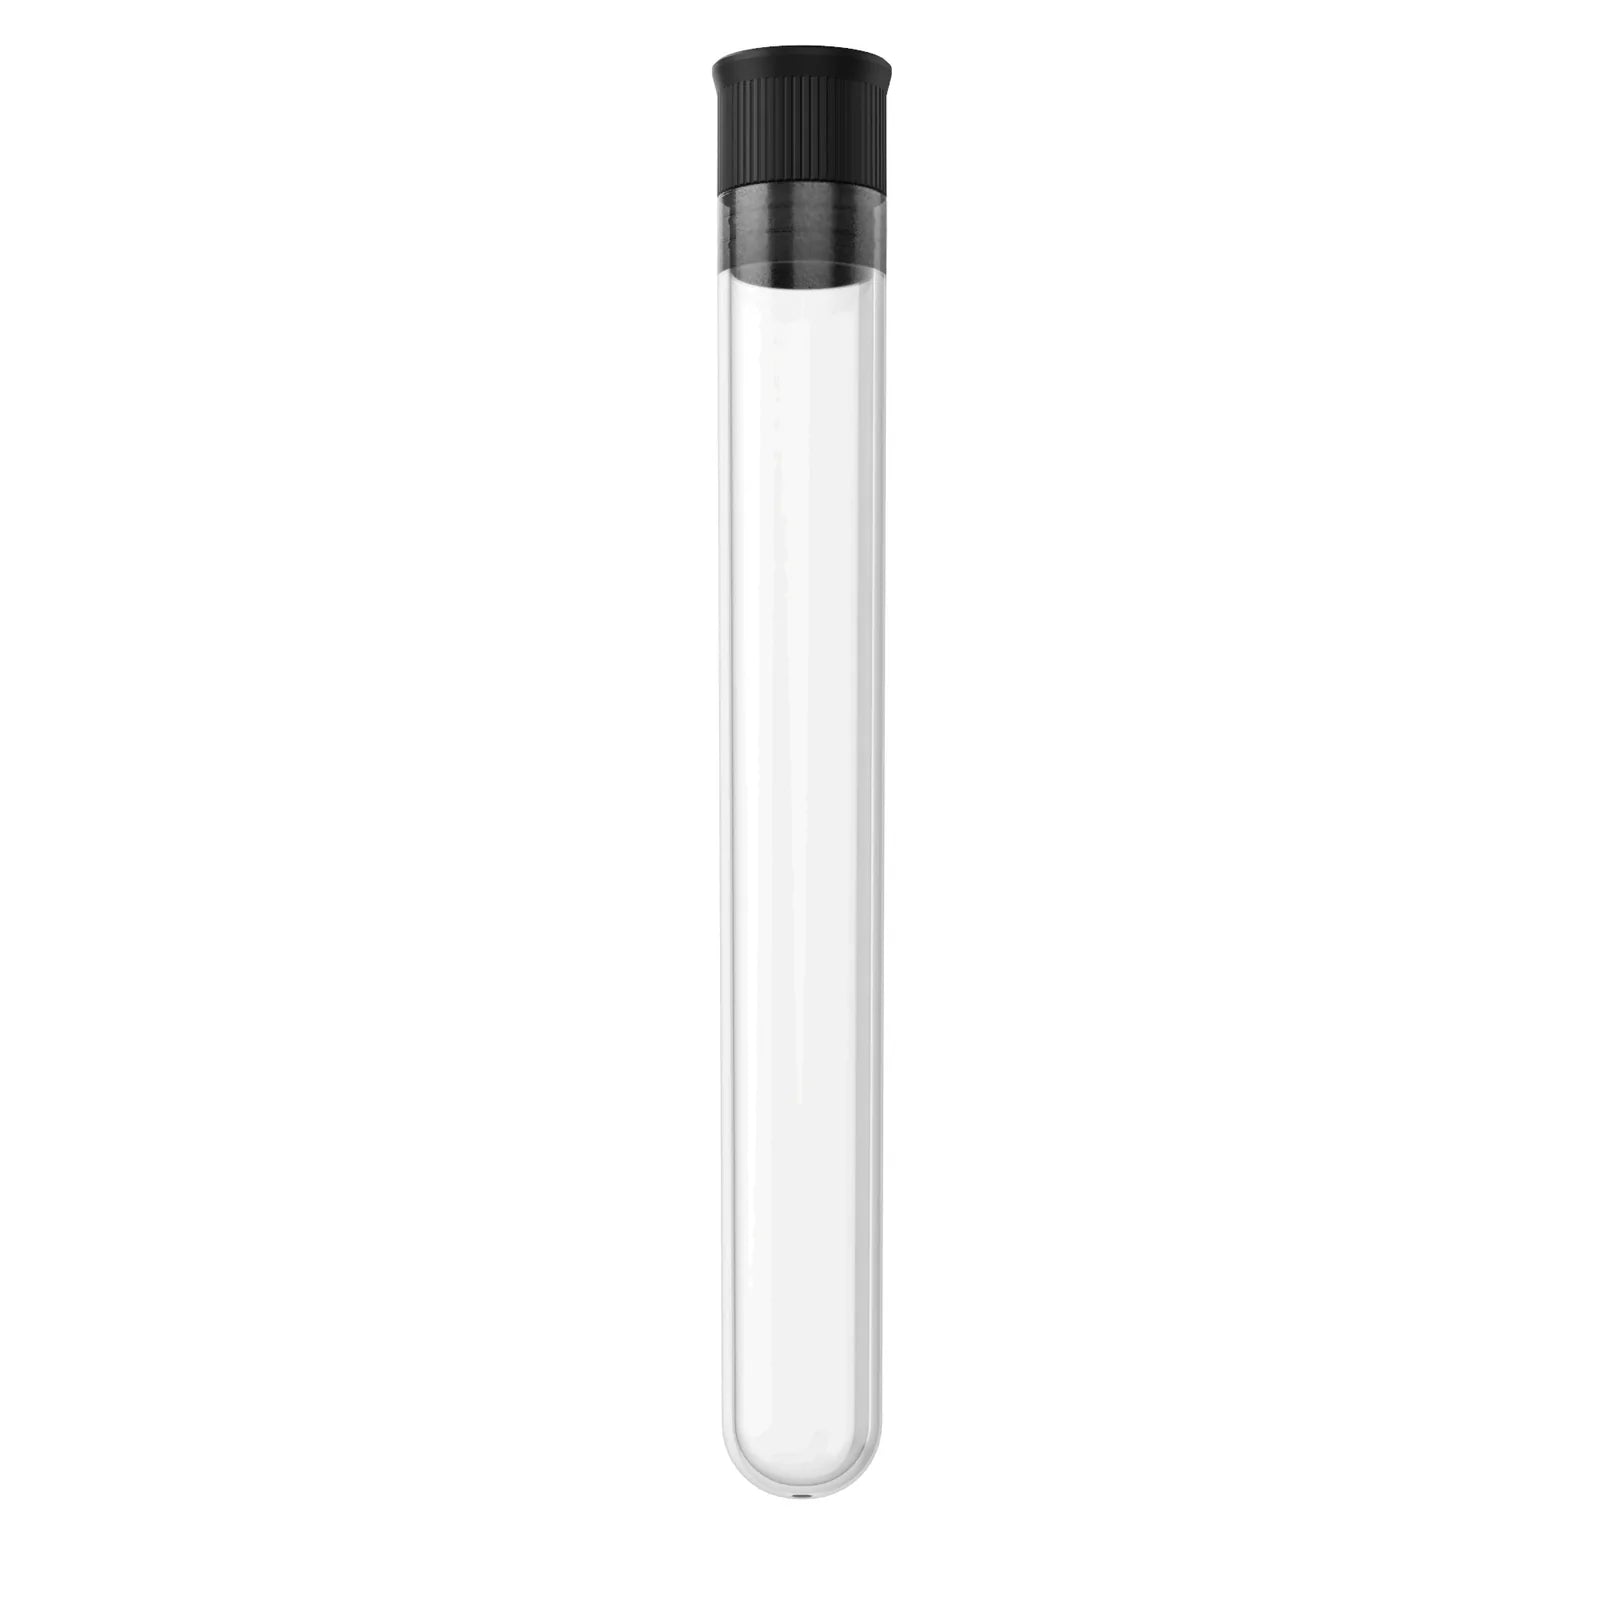 Buy Mad Heaters Storage Tube - Wick and Wire Co Melbourne Vape Shop, Victoria Australia